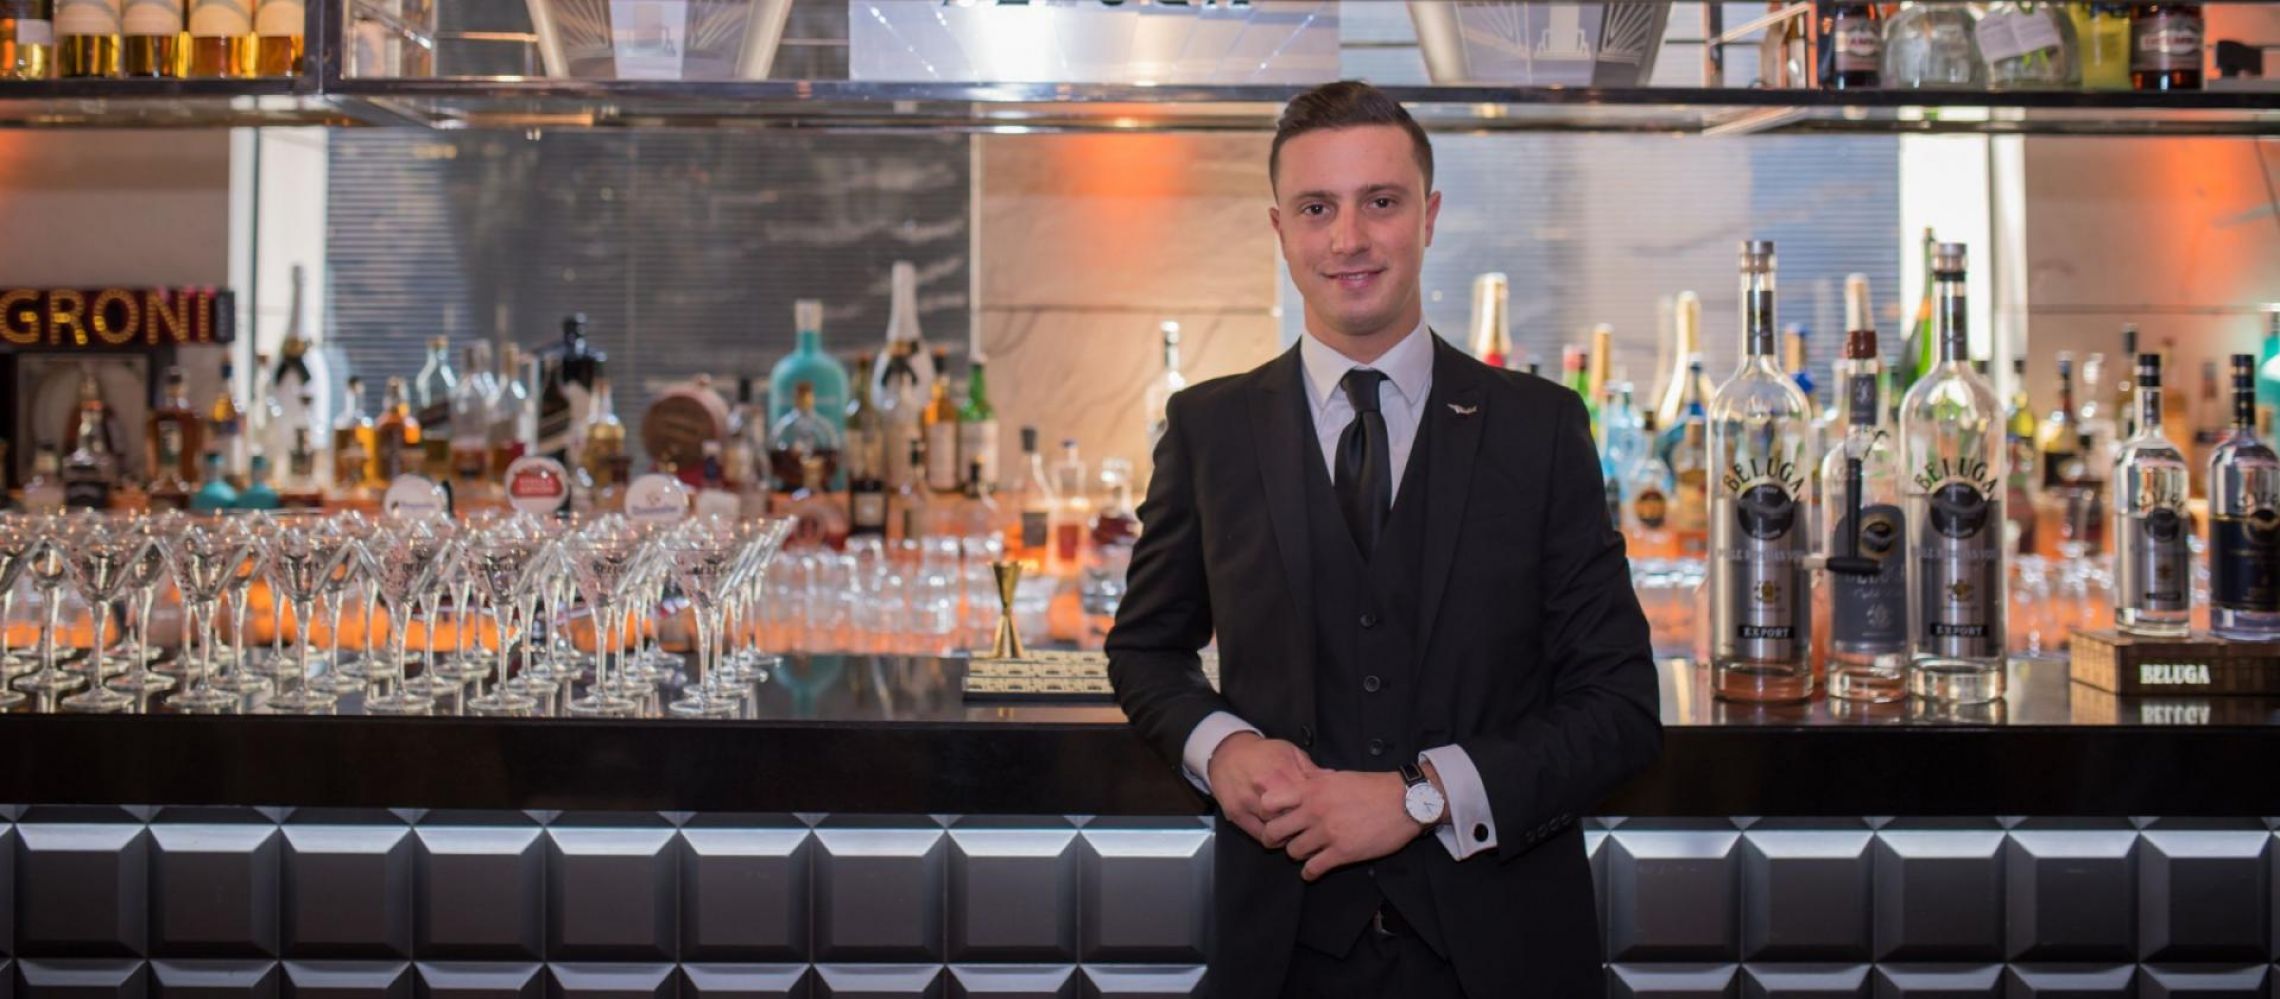 Photo for:  Know Your Bartenders: Agostino Schiavo, Assistant Bar Manager at The Arts Club